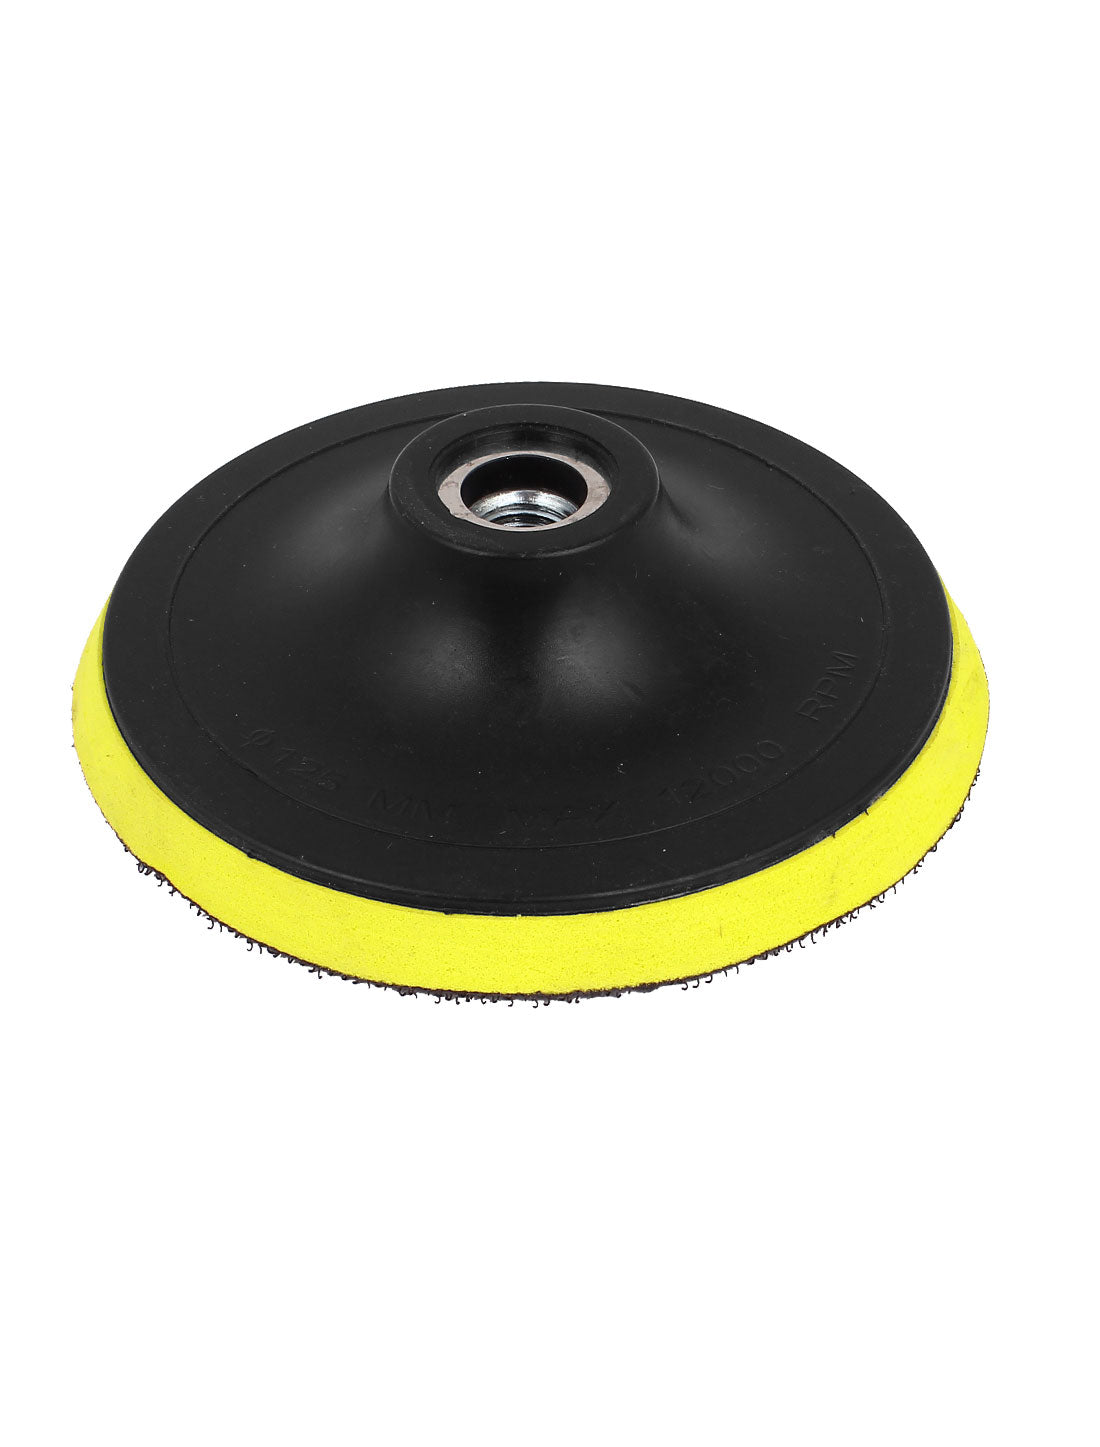 uxcell Uxcell Grinder Sanding Polishing M10 125mm 5" Backing Backer Pad Yellow